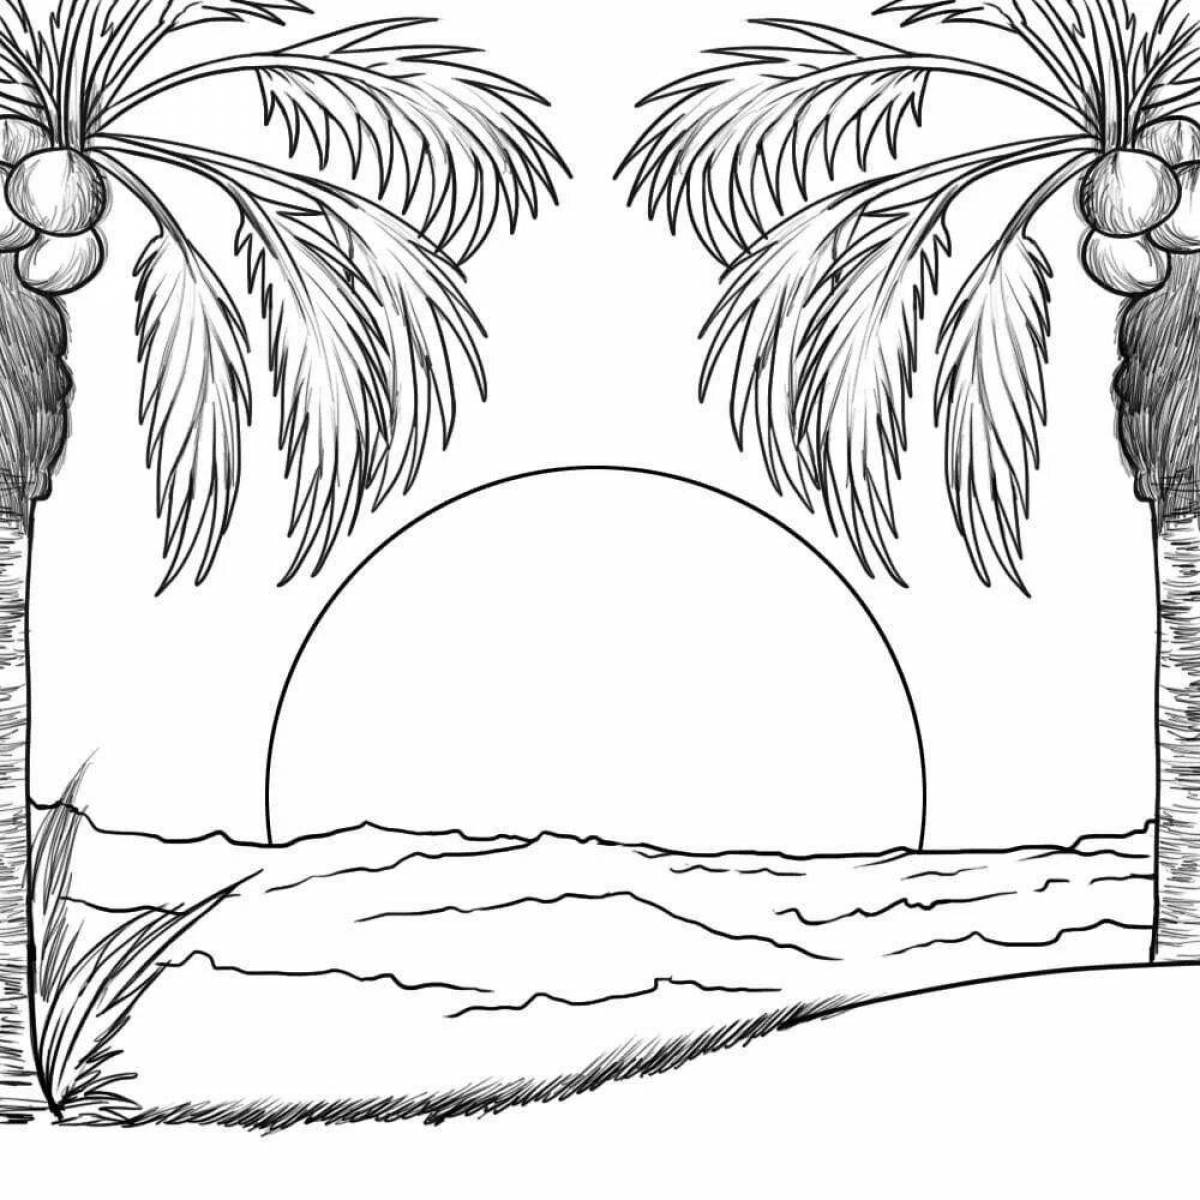 Vibrant sunset coloring page for kids